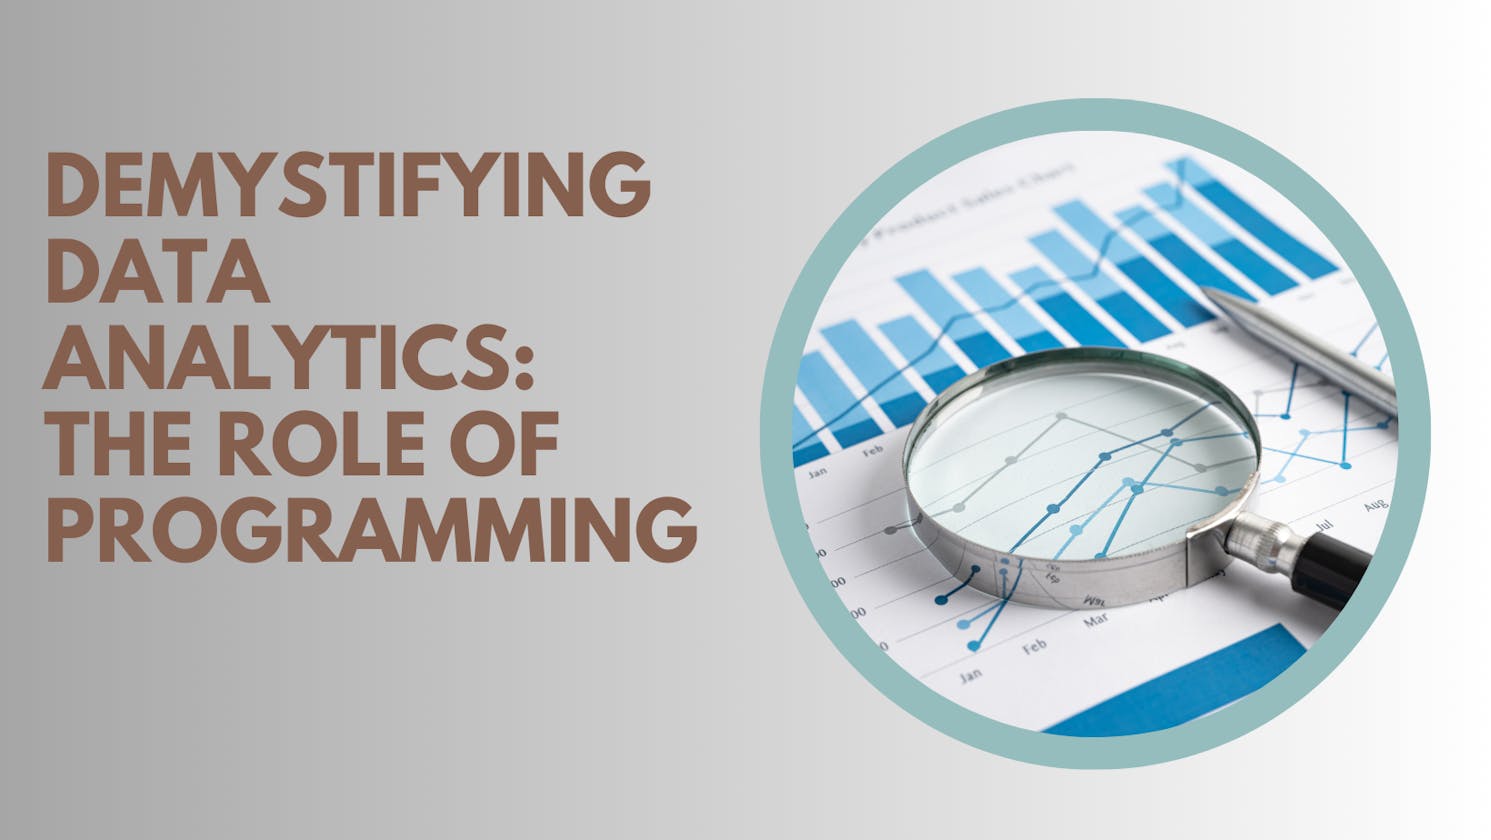 Demystifying Data Analytics: The Role of Programming